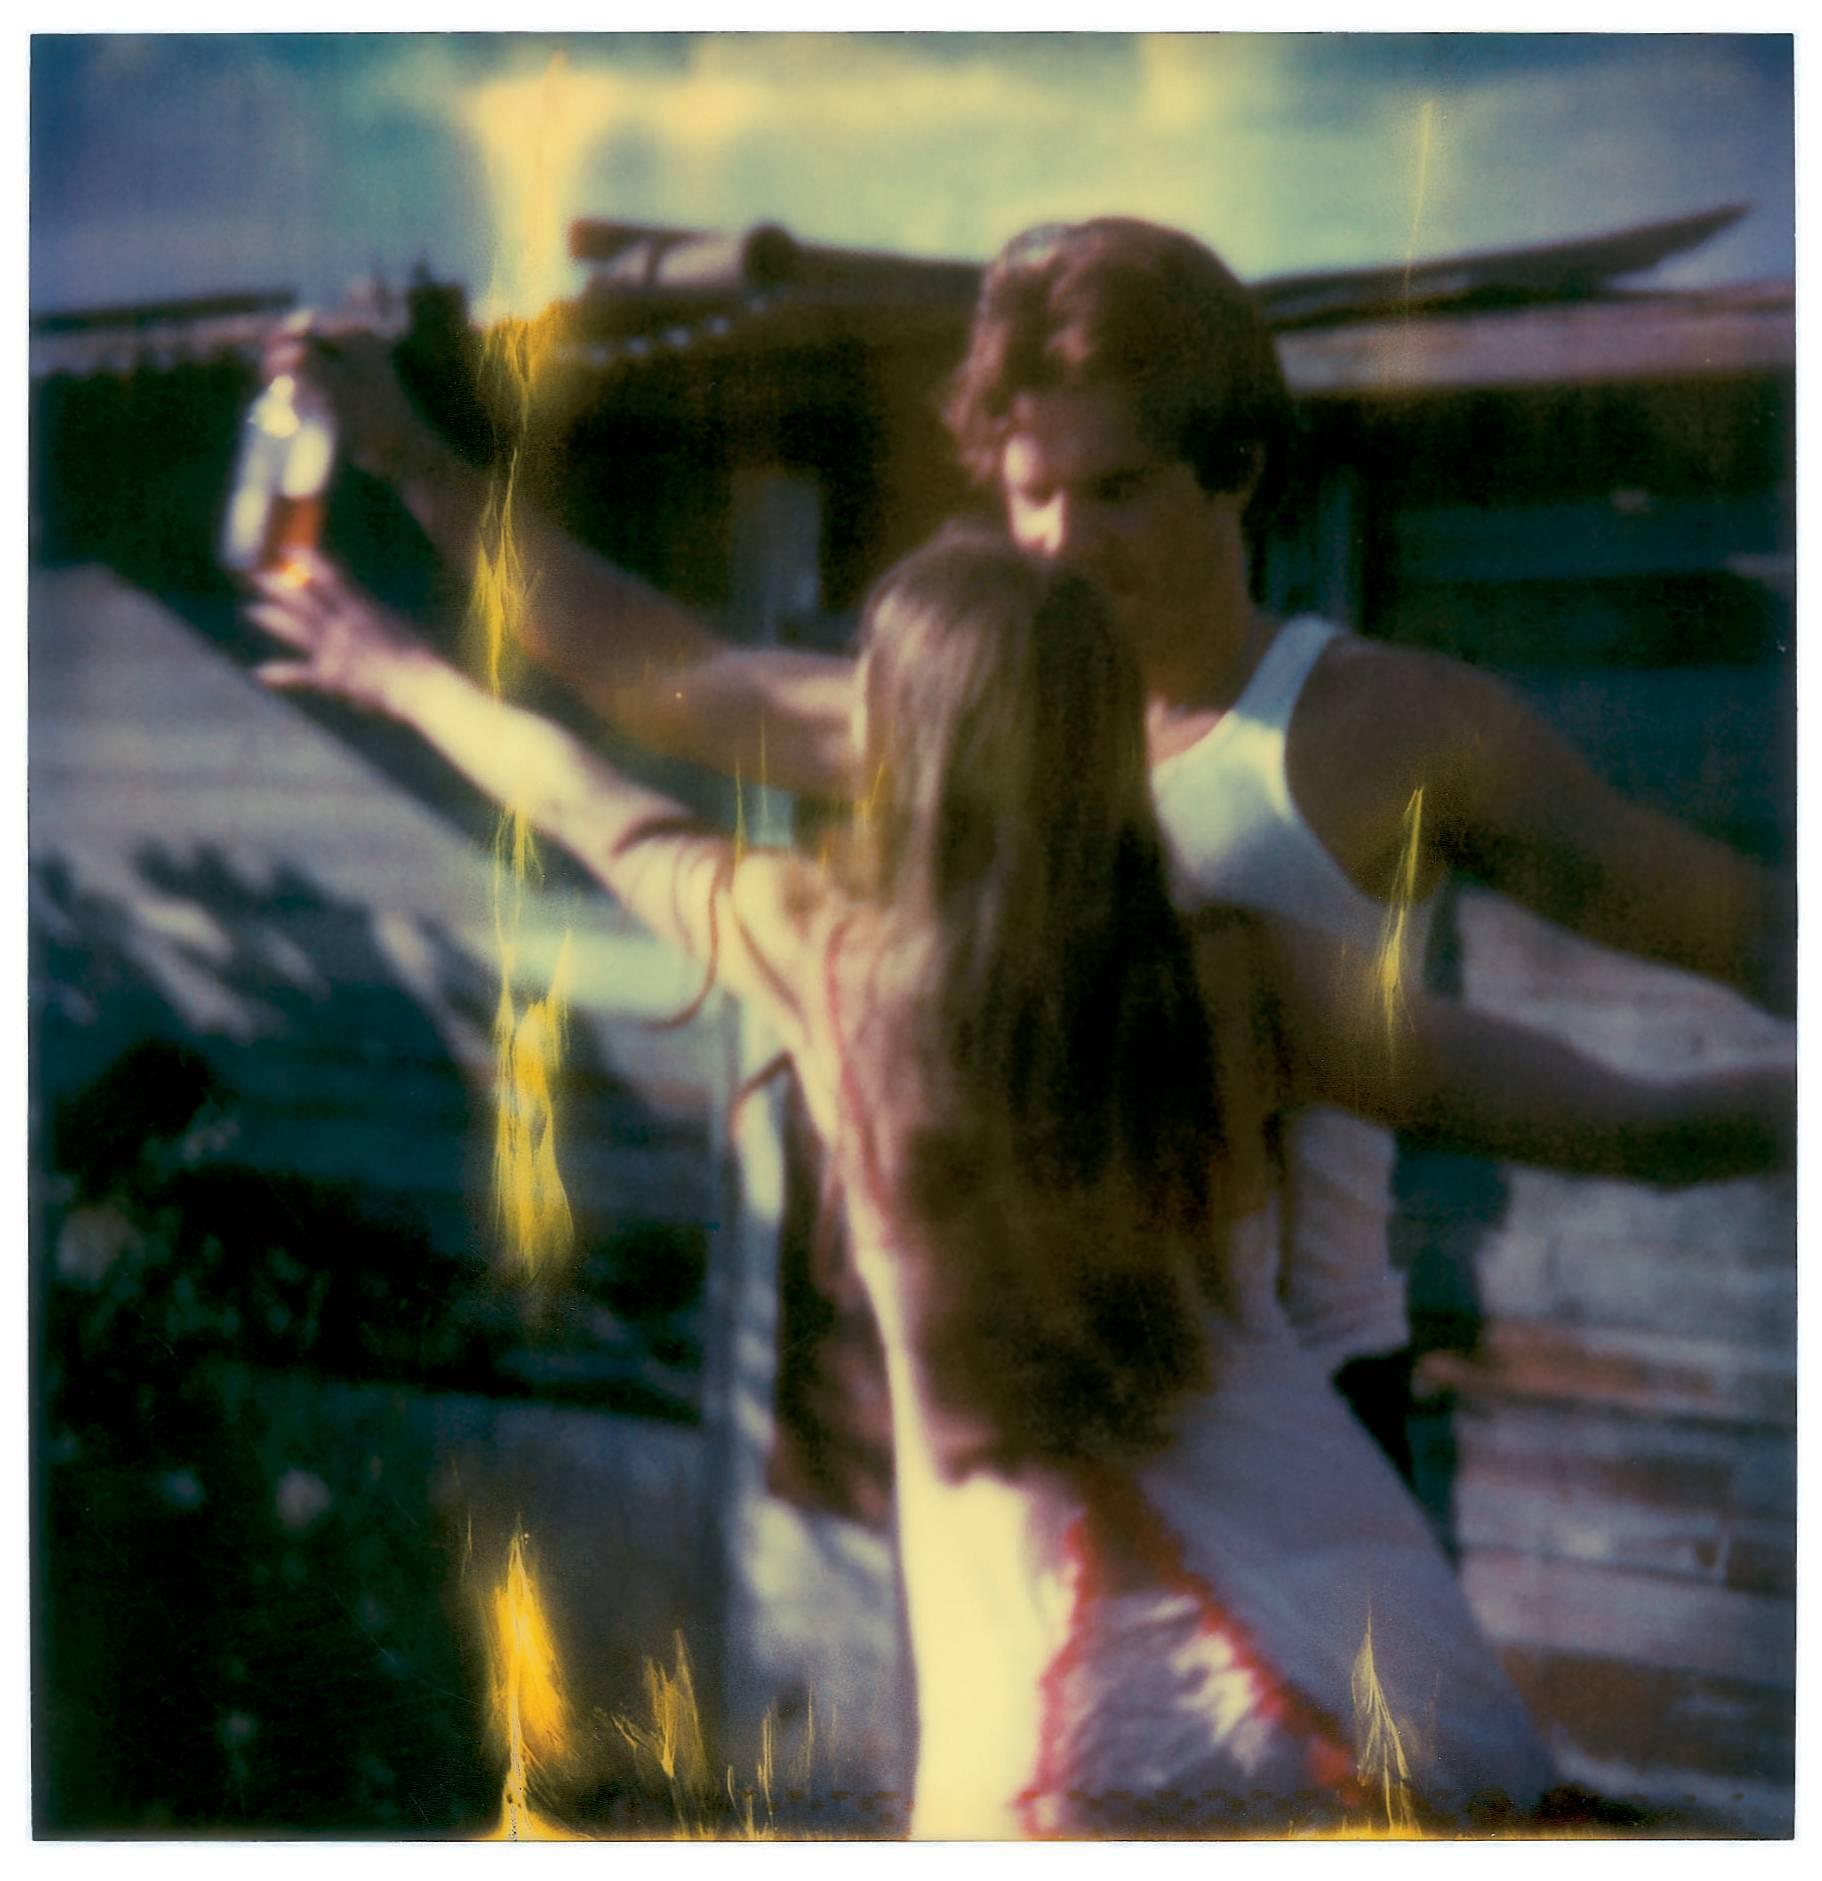 'Whisky Dance I' (Sidewinder) - 2005

8 pieces installed including gaps 45x90cm, 20x20cm, Edition 5/10, 
8 Archival C-Prints, on Fuji Crystal Archive Paper, matte surface, based on the 8 Polaroids. 
Artist Inventory No. 3175.12.
Signature label and